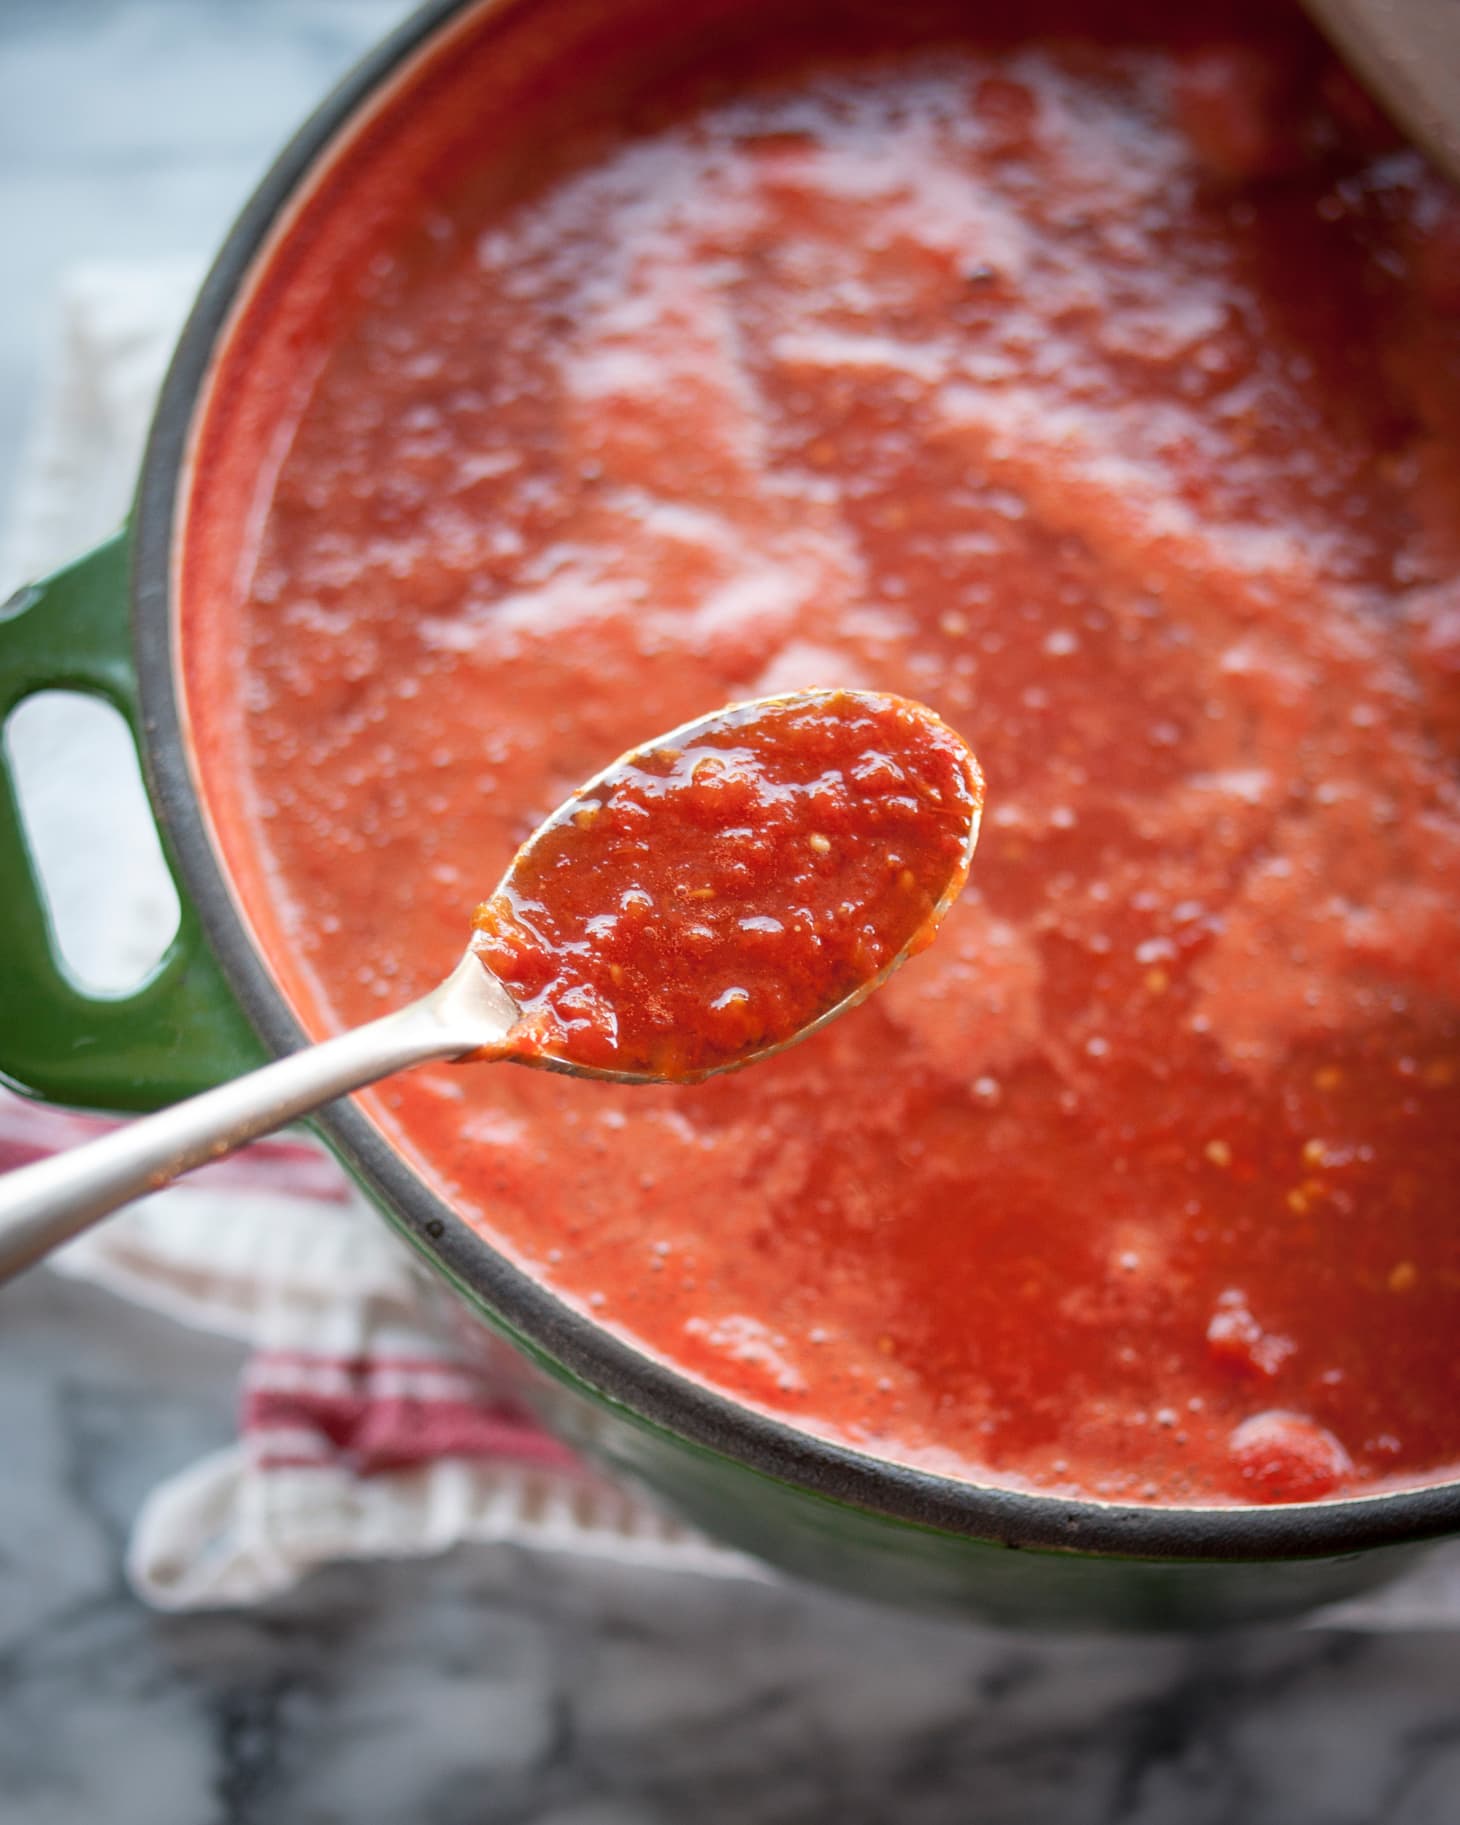 How To Make Tomato Sauce with Fresh Tomatoes